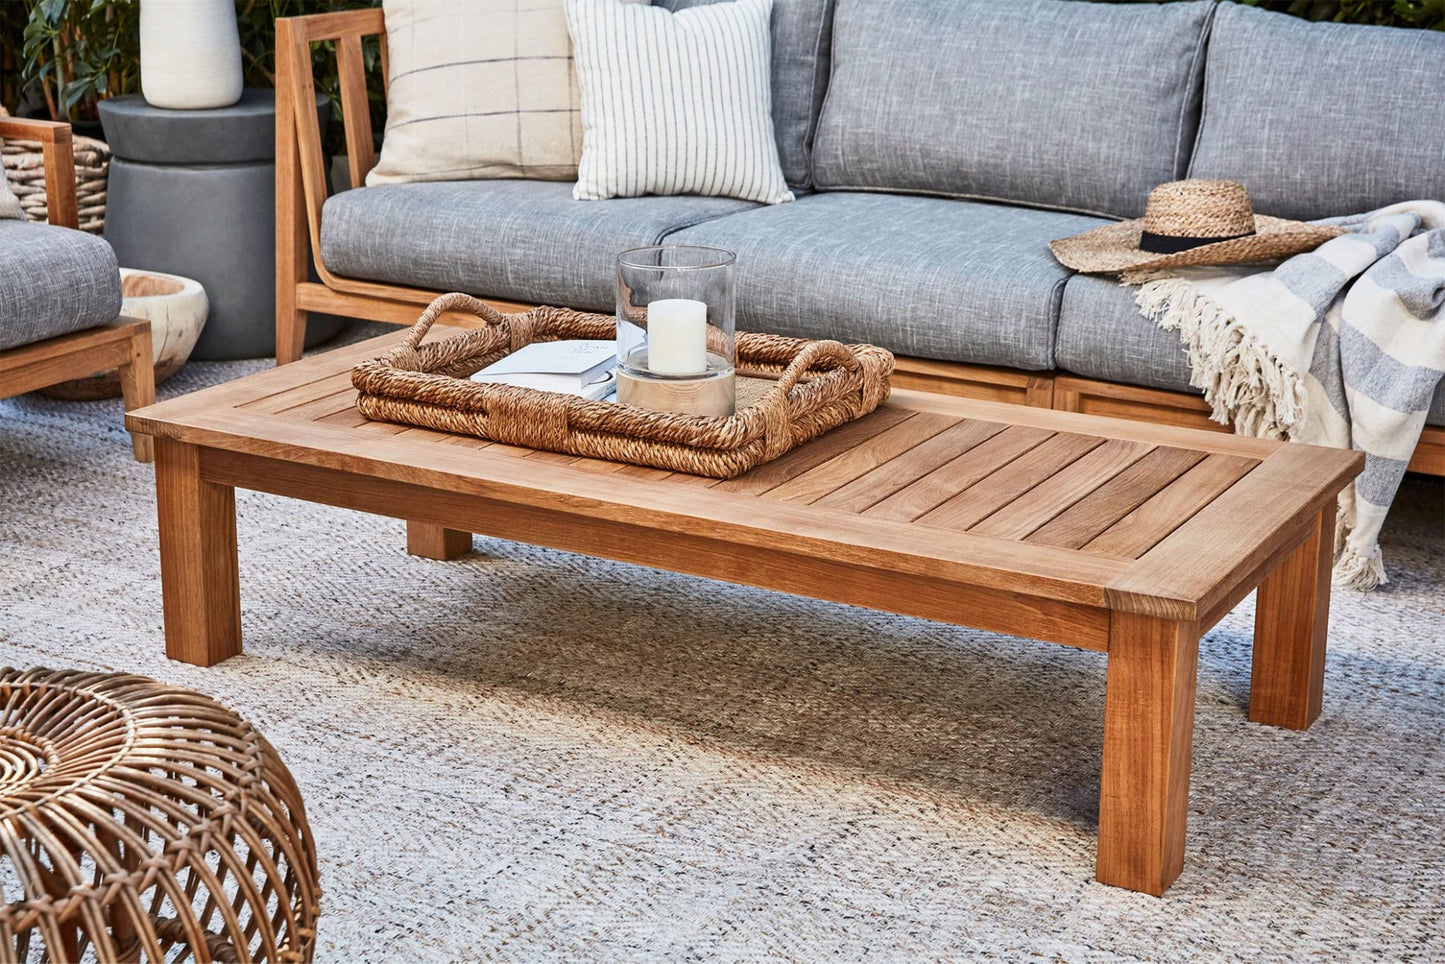 Live Outer 58" x 26" Large Teak Outdoor Coffee Table - Square Leg